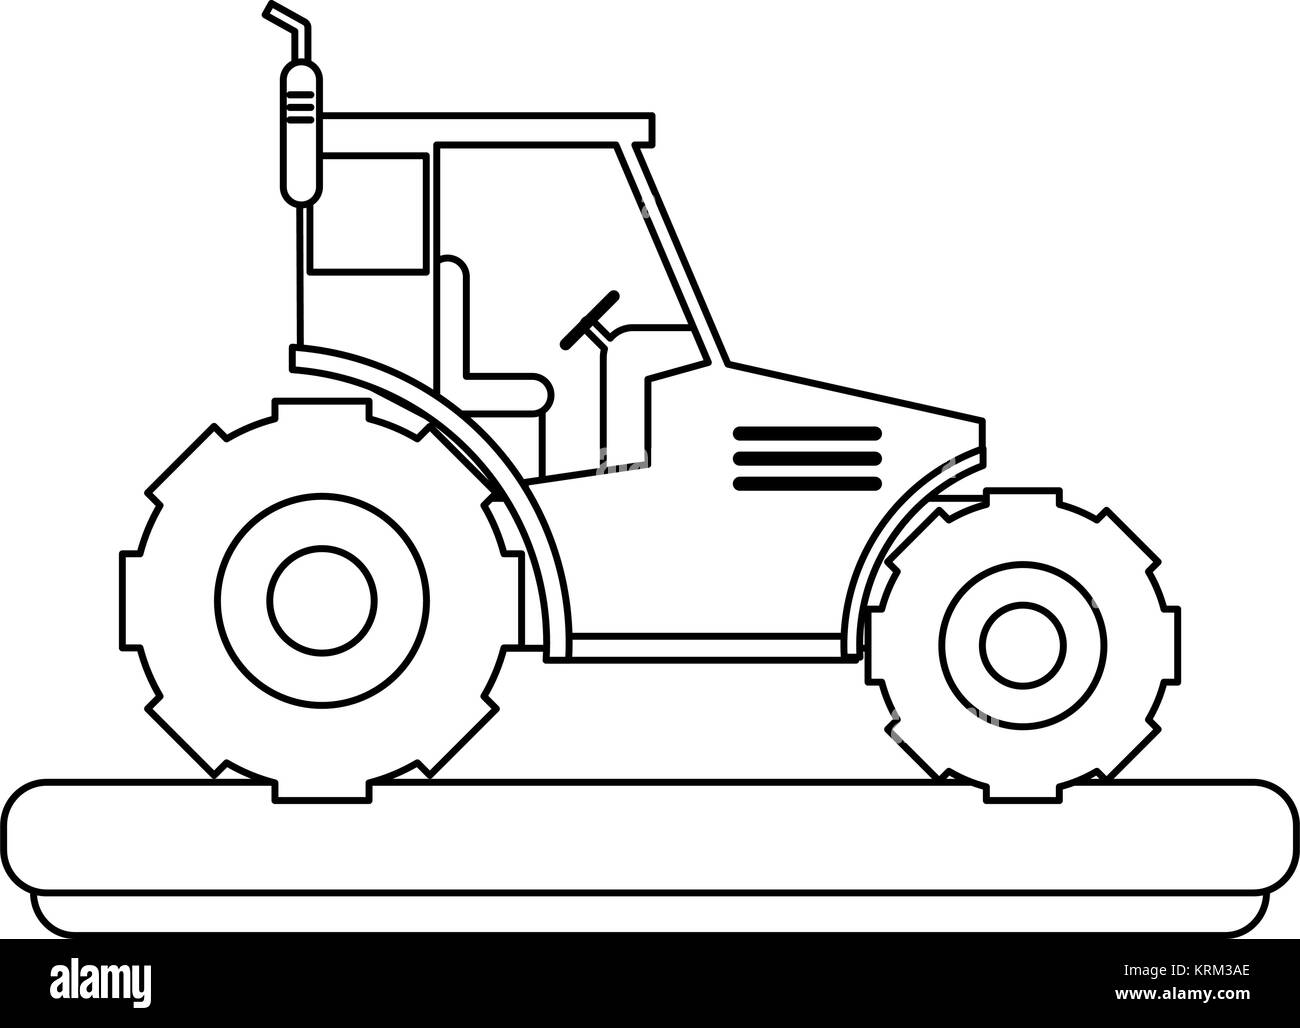 Tractor Black and White Stock Photos & Images - Alamy